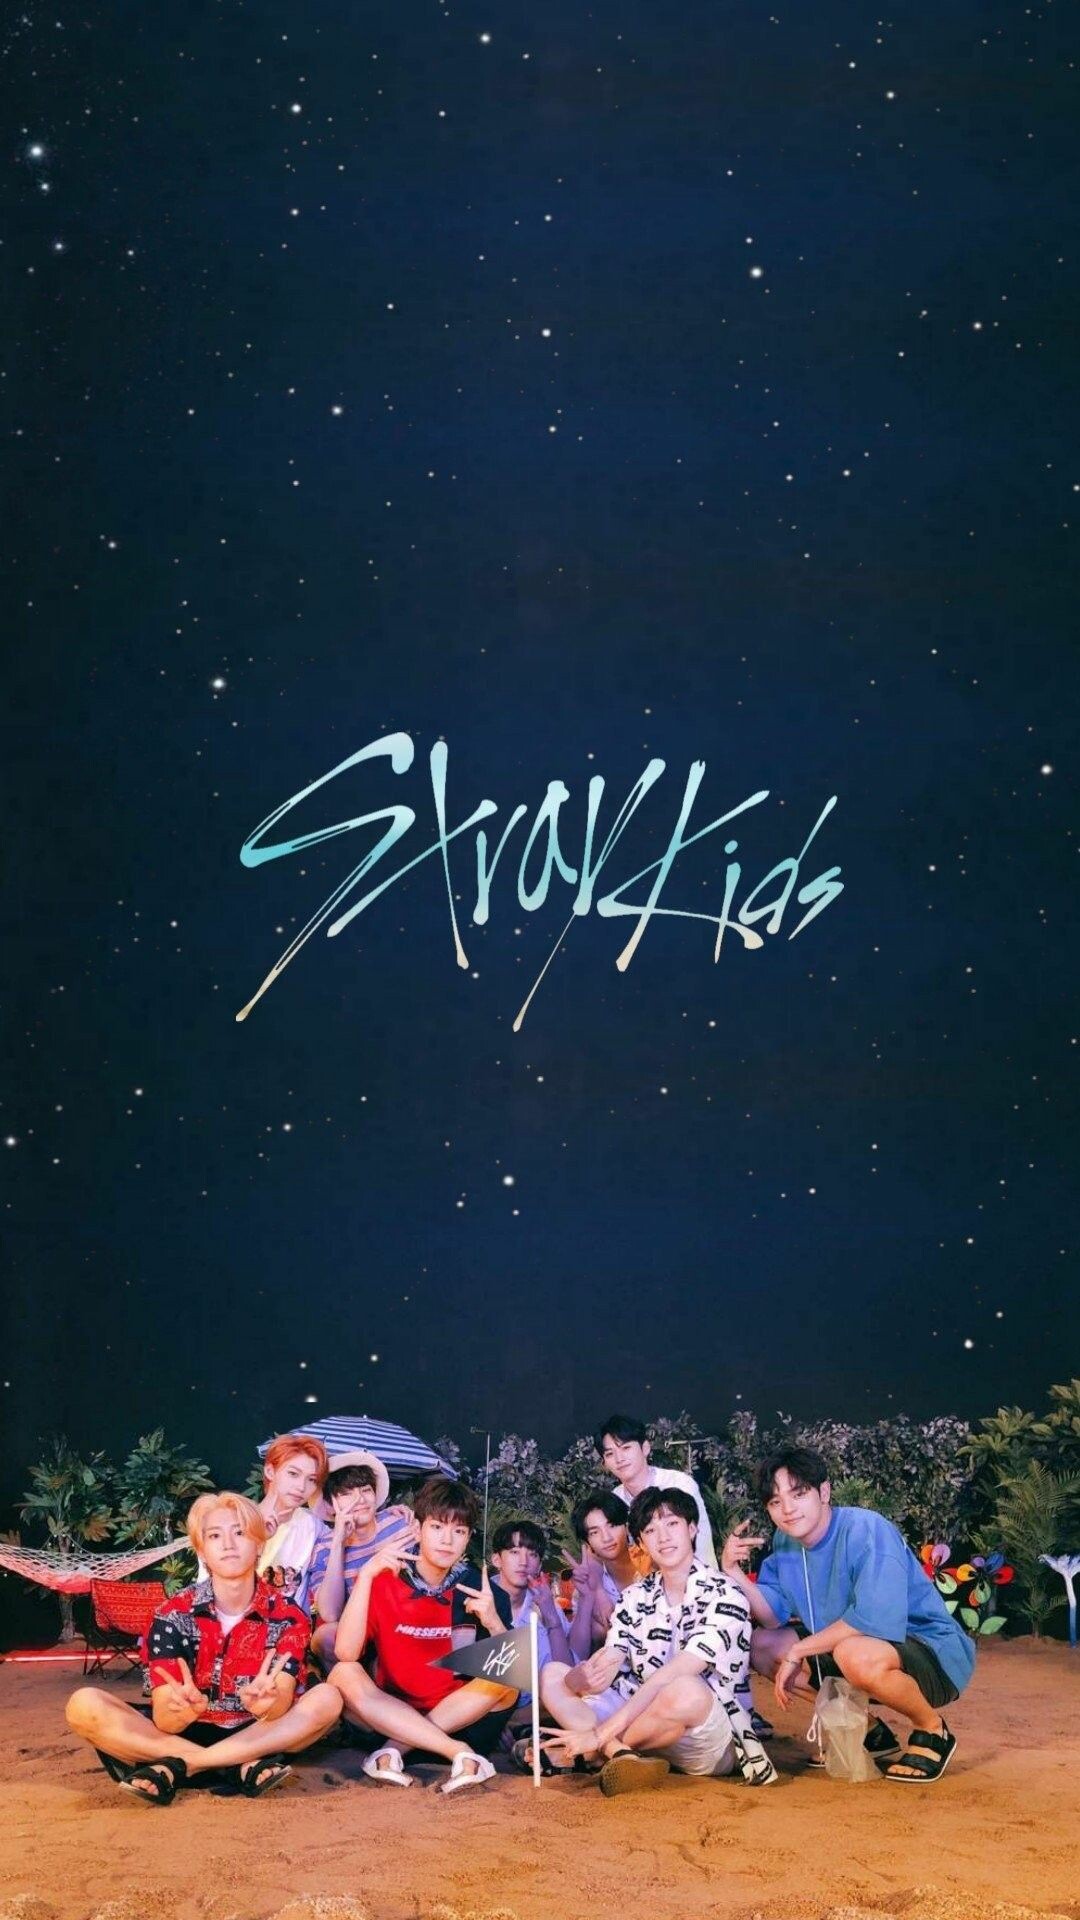 Stray Kids: Noeasy peaked at number one on the Gaon Album Chart. 1080x1920 Full HD Background.